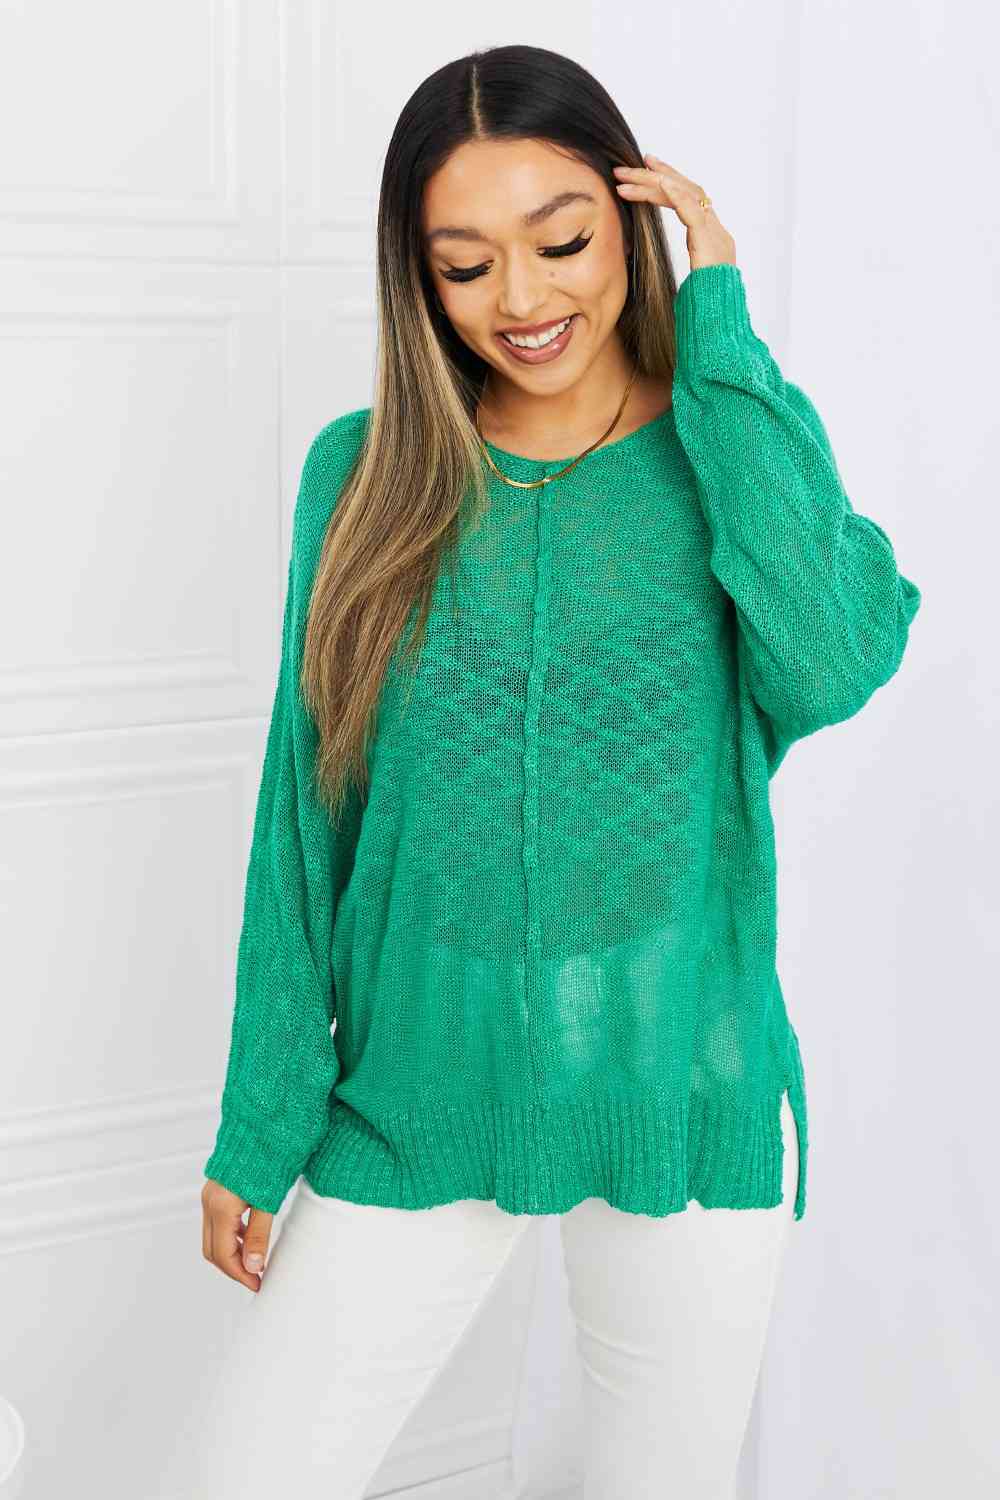 Exposed Seam Slit Knit Top in Kelly Green - Green / S - Camis & Tops - Shirts & Tops - 1 - 2024